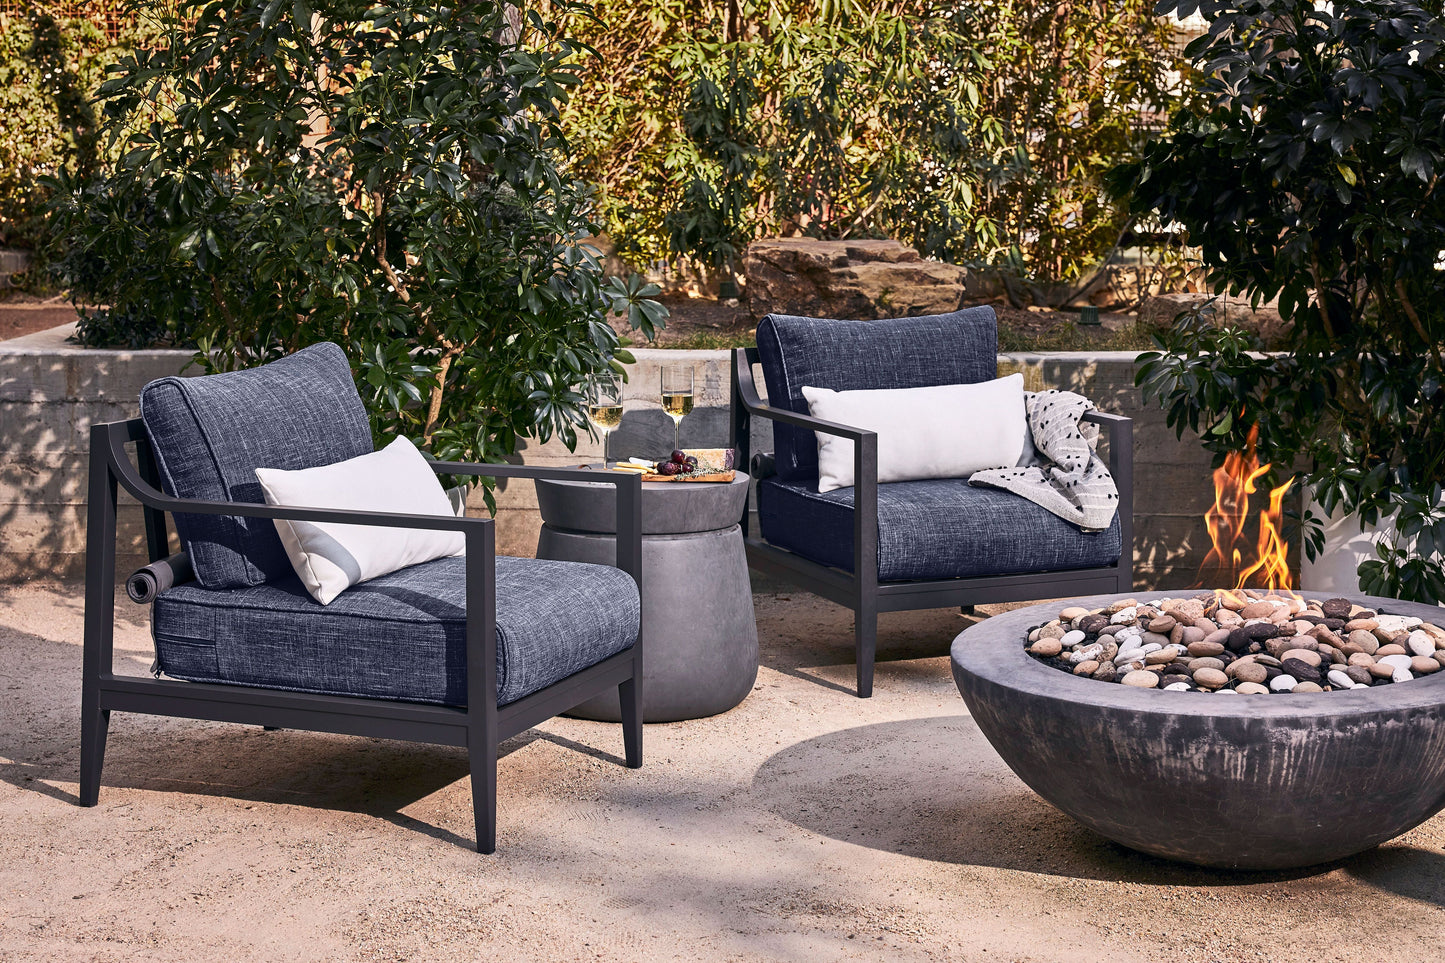 Live Outer 156" x 64" Charcoal Aluminum Outdoor U Sectional 7-Seat With Deep Sea Navy Cushion